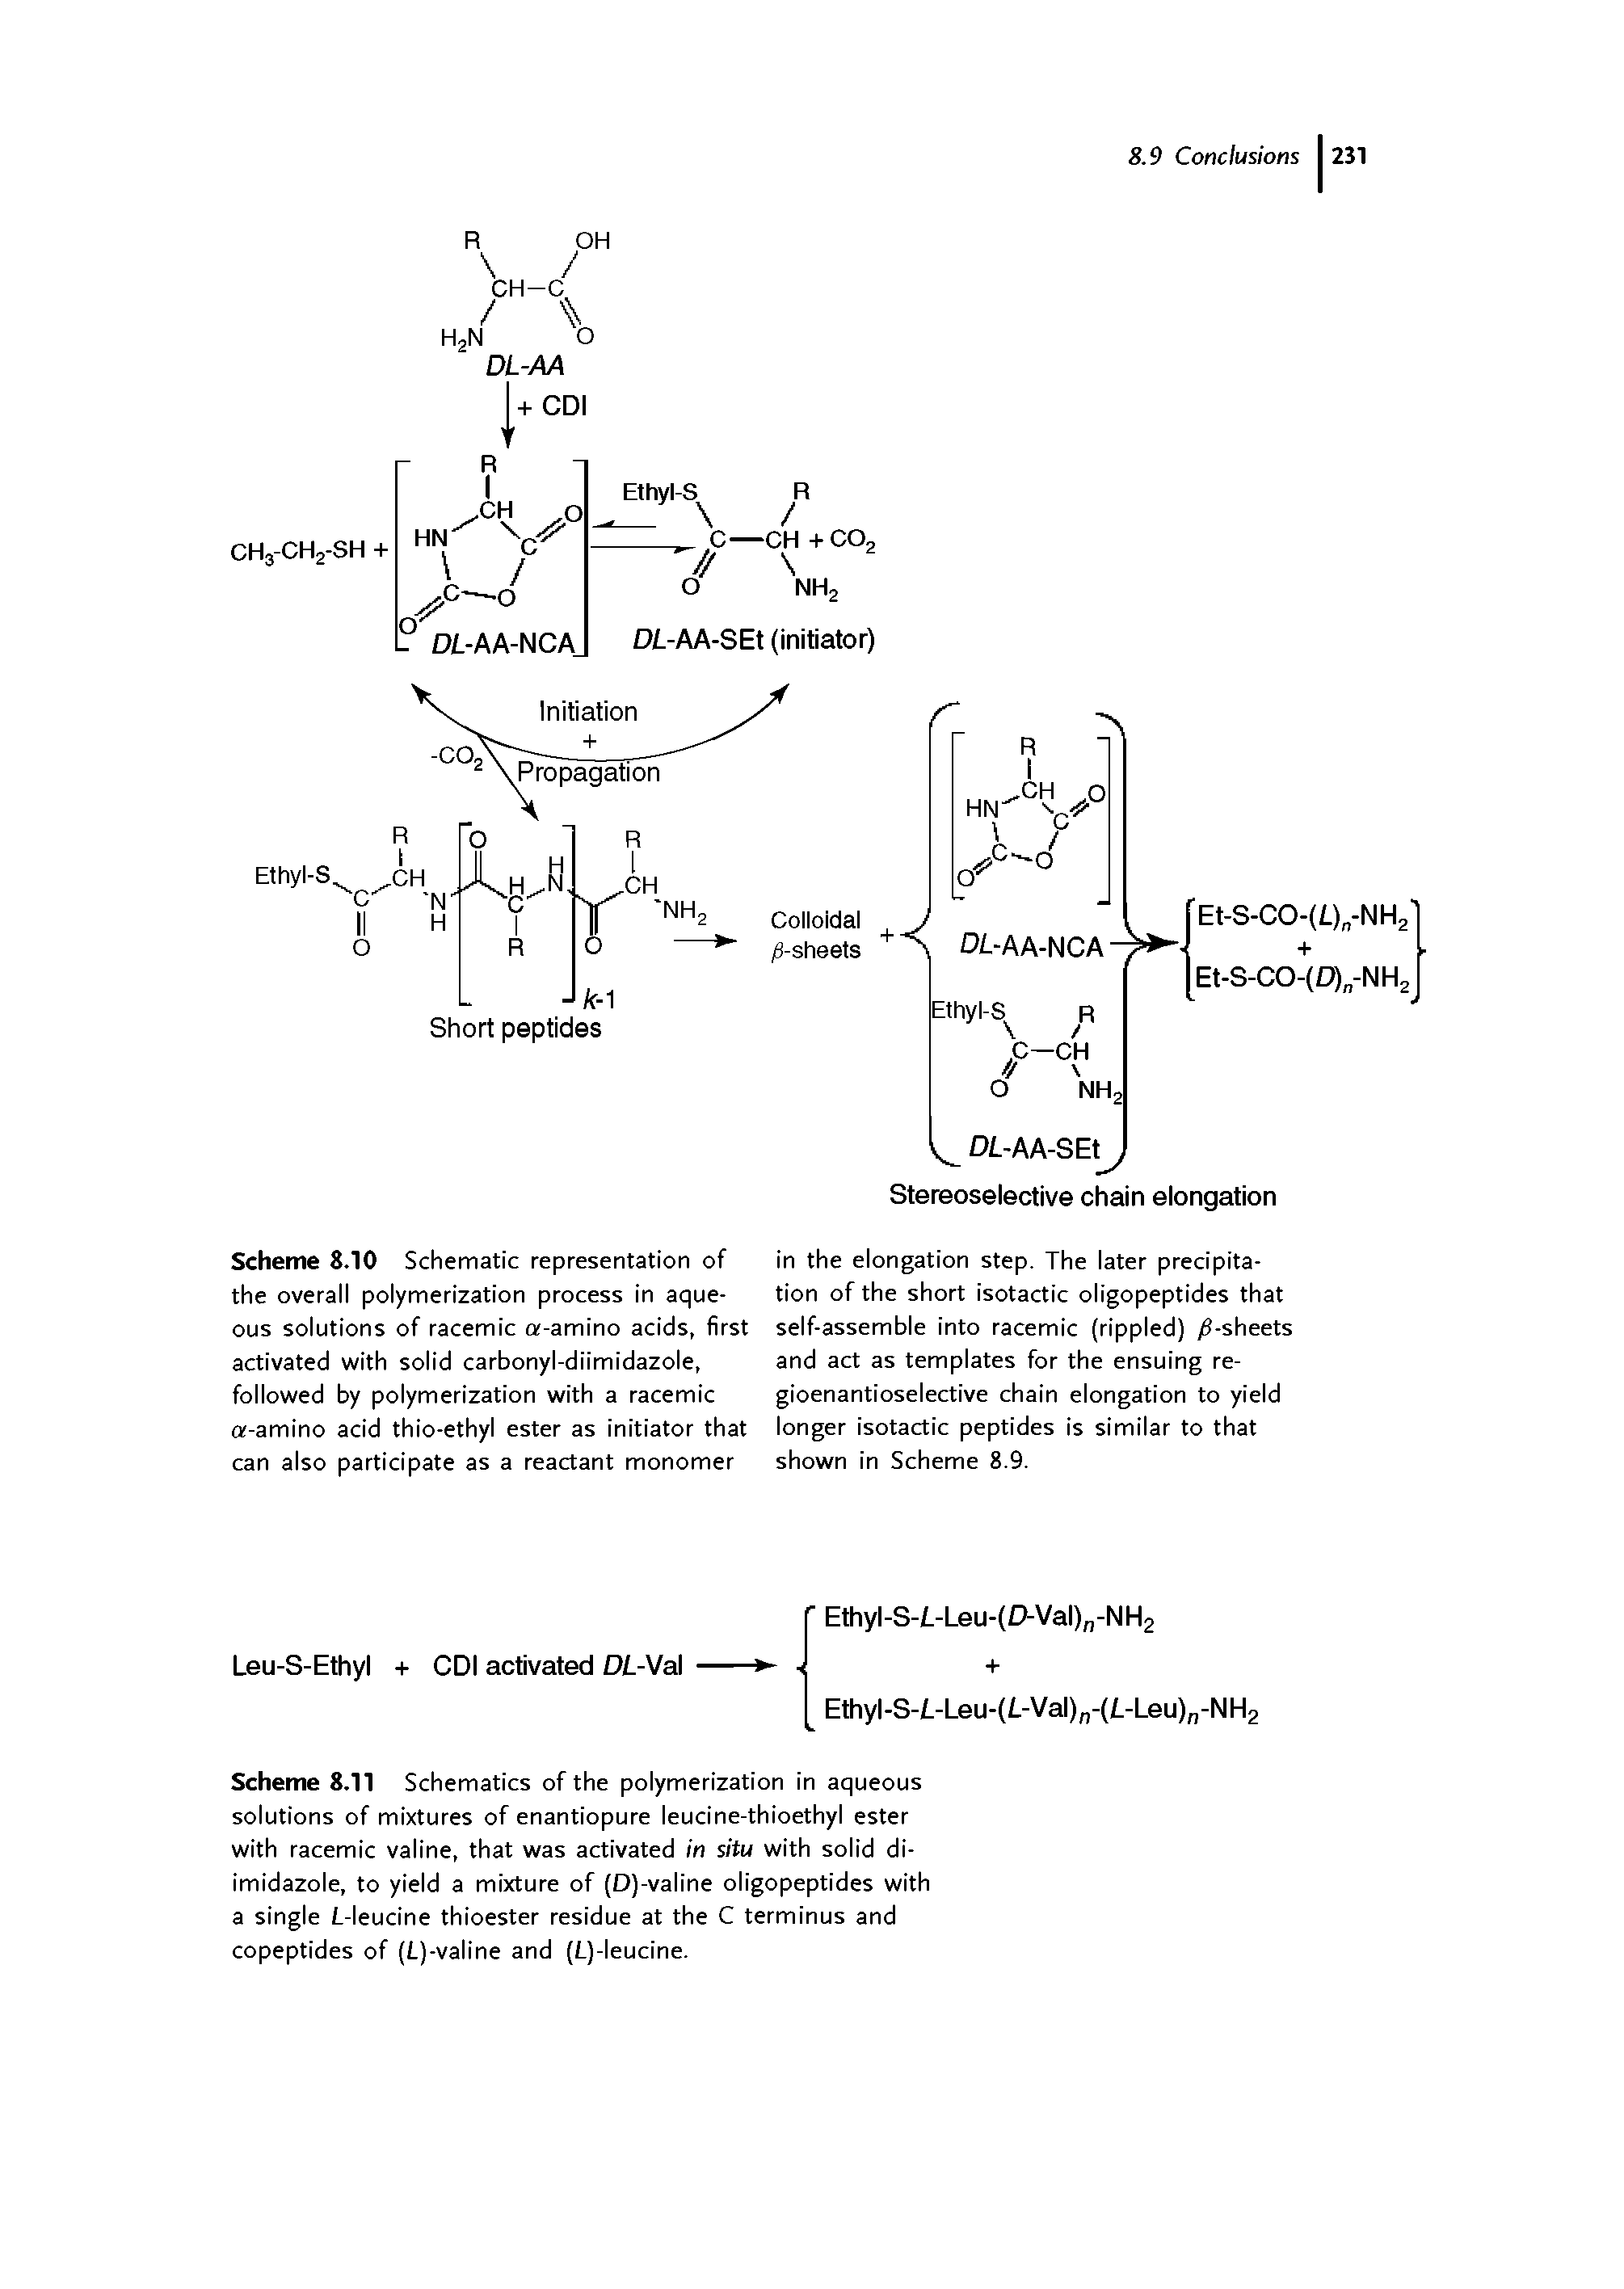 Scheme 8.10 Schematic representation of the overall polymerization process in aqueous solutions of racemic o -amino acids, first activated with solid carbonyl-diimidazole, followed by polymerization with a racemic a-amino acid thio-ethyl ester as initiator that can also participate as a reactant monomer...